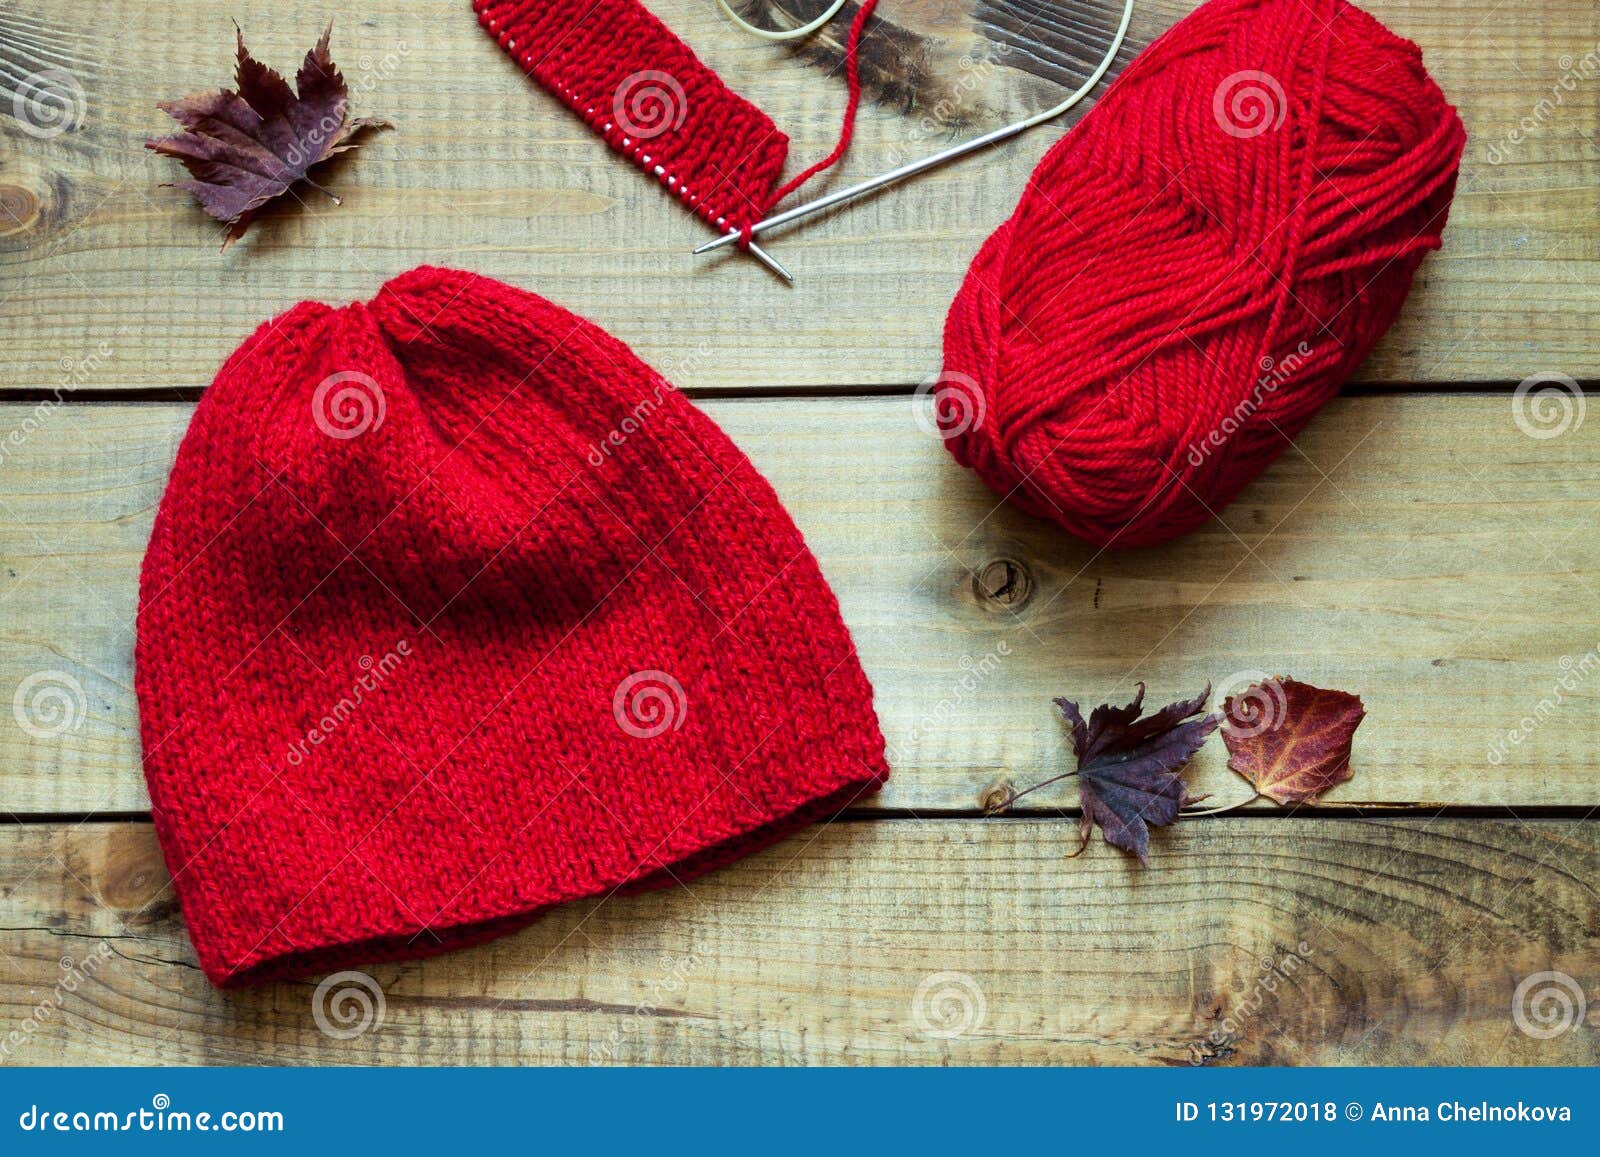 Red Knitting Wool, Knitting Needles and Dried Leaves Stock Photo ...